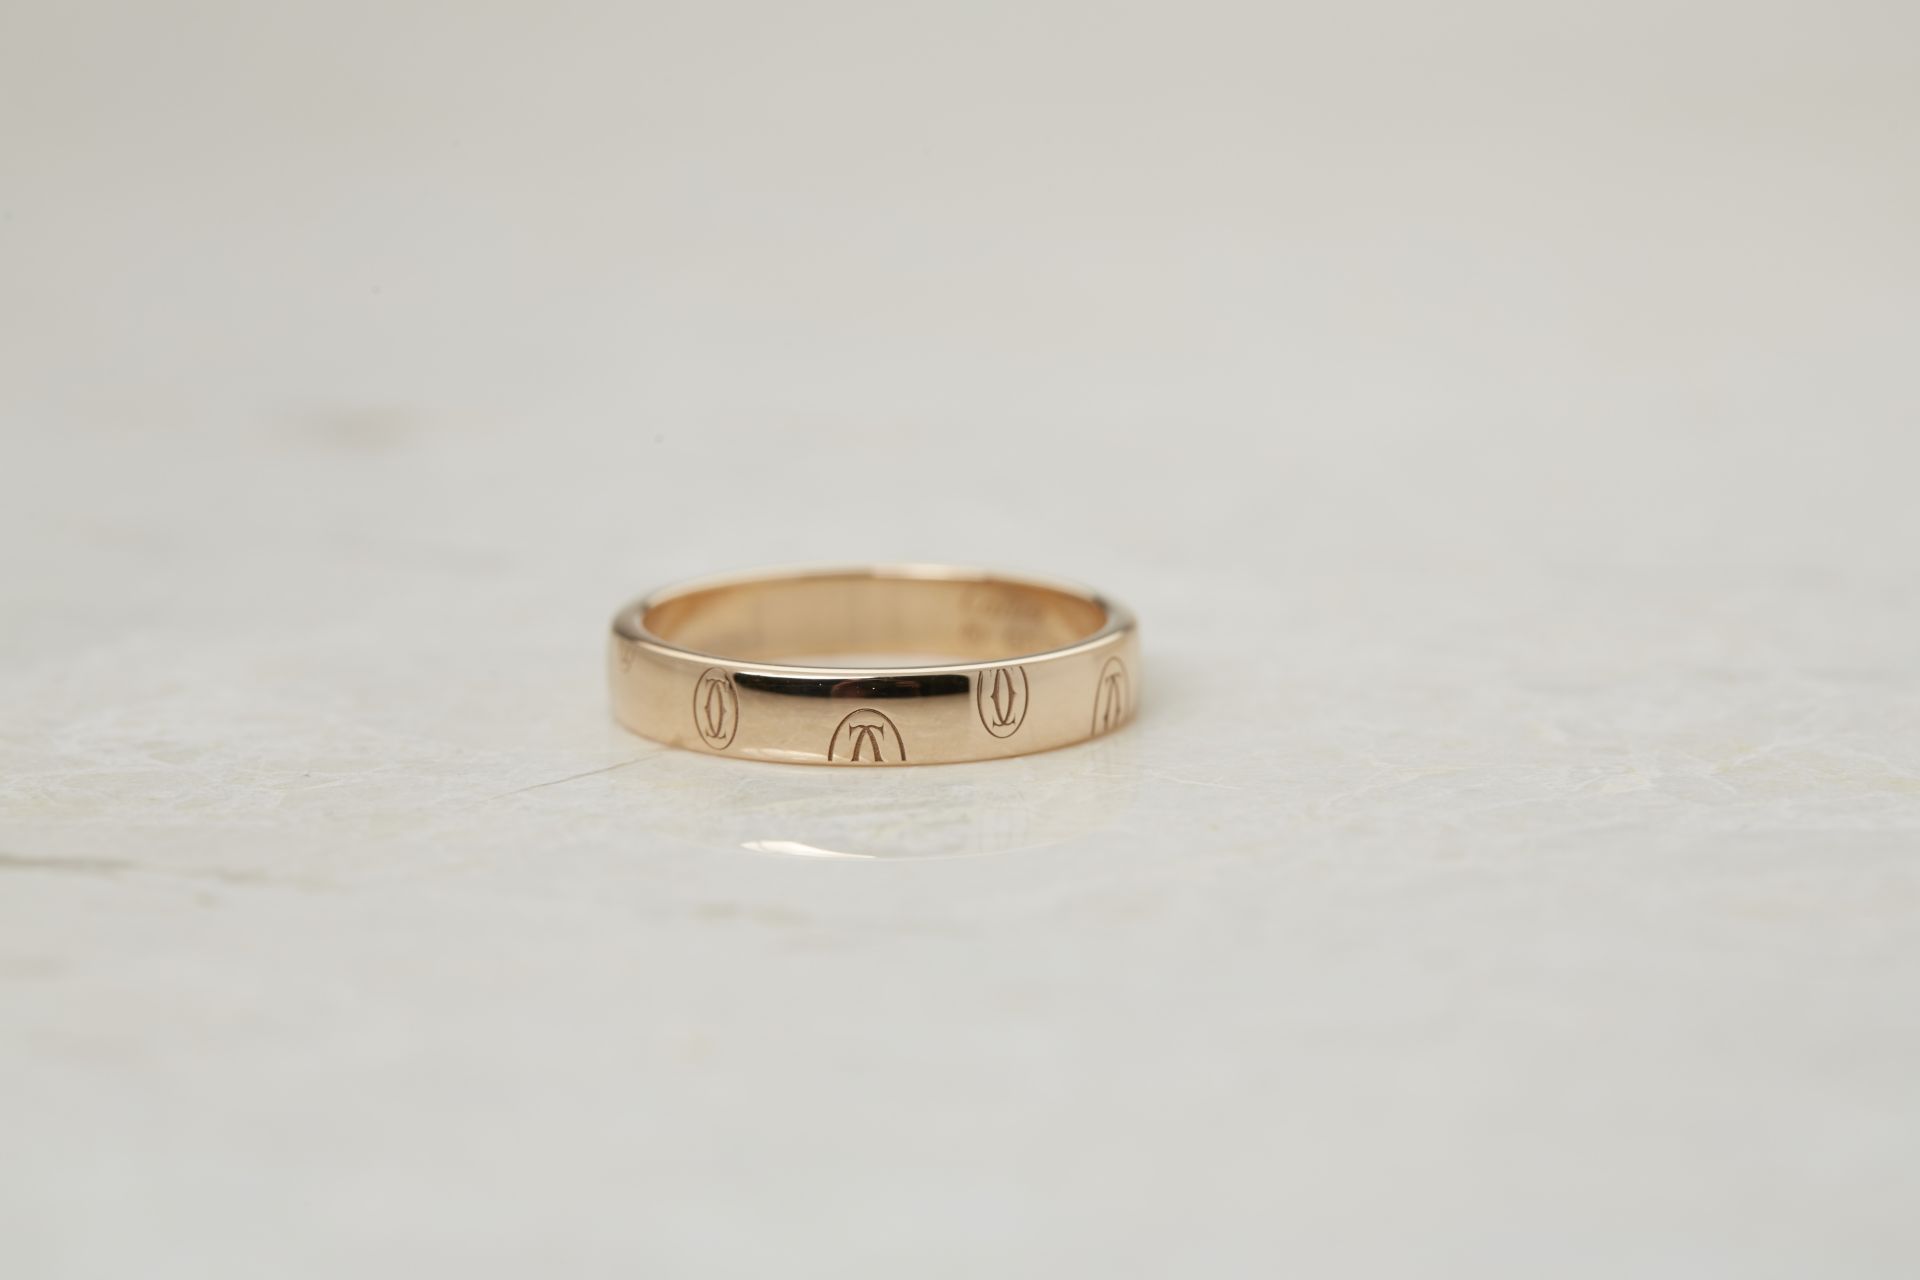 Cartier 18k Rose Gold Double C Logo Design Ring with Presentation Box - Image 6 of 7